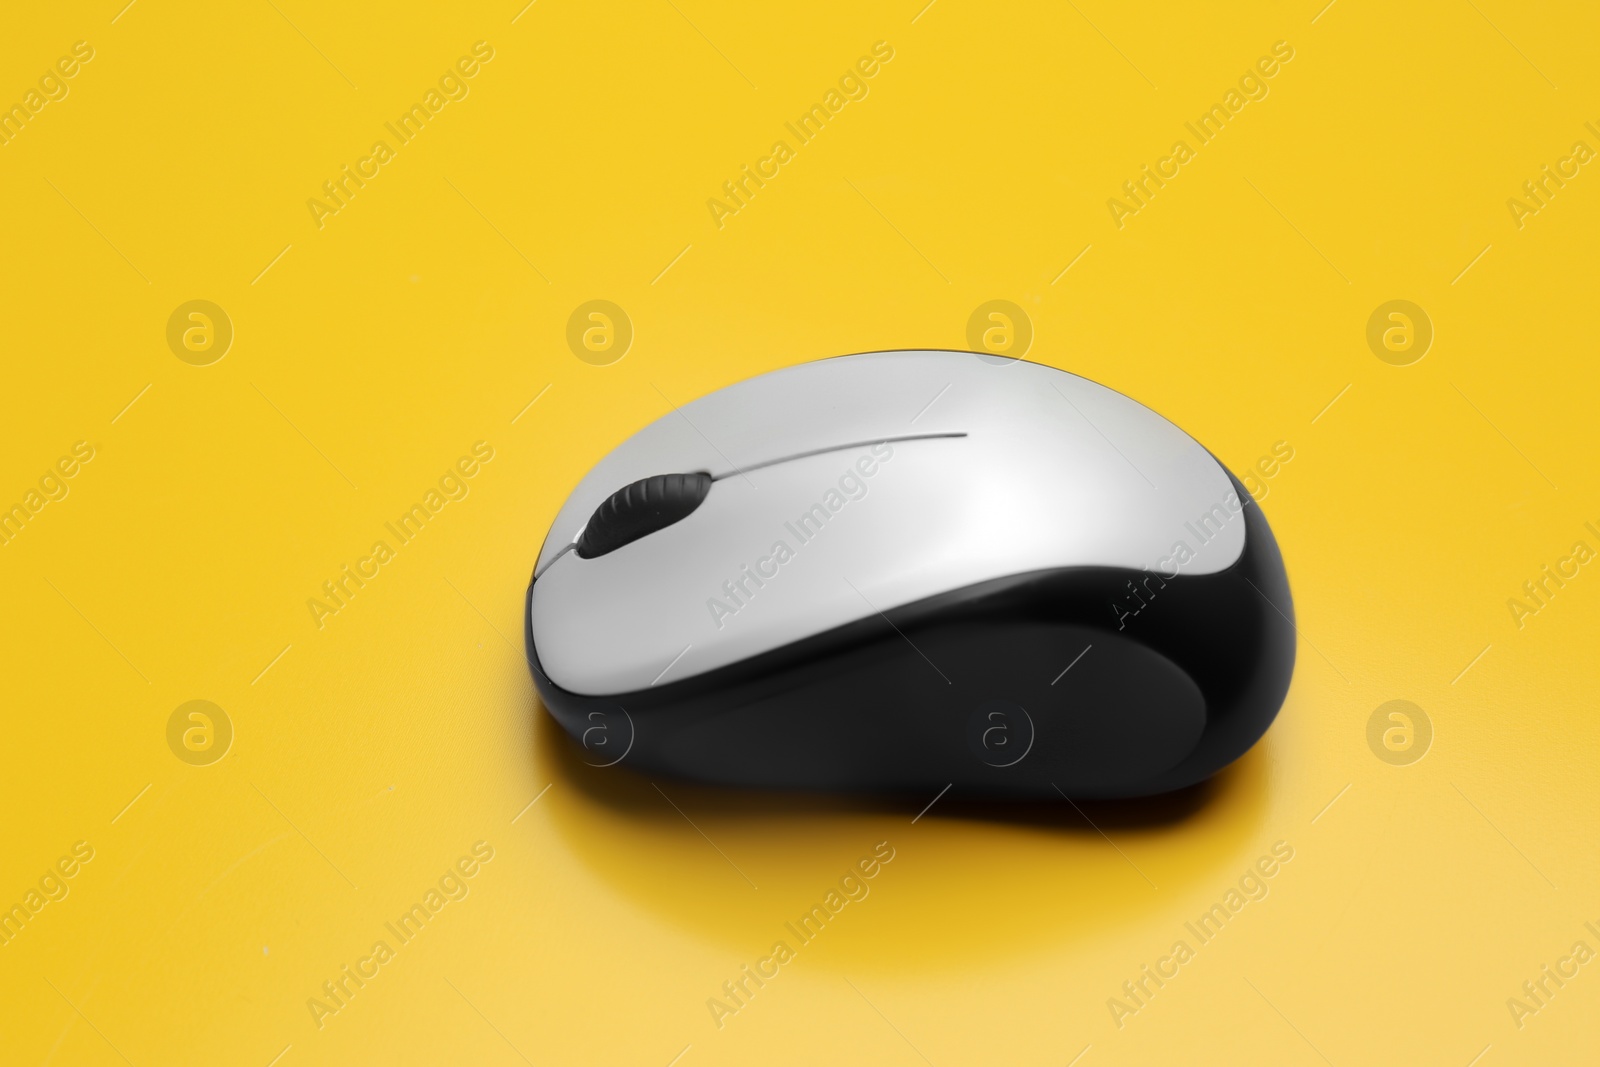 Photo of Wireless computer mouse on color background